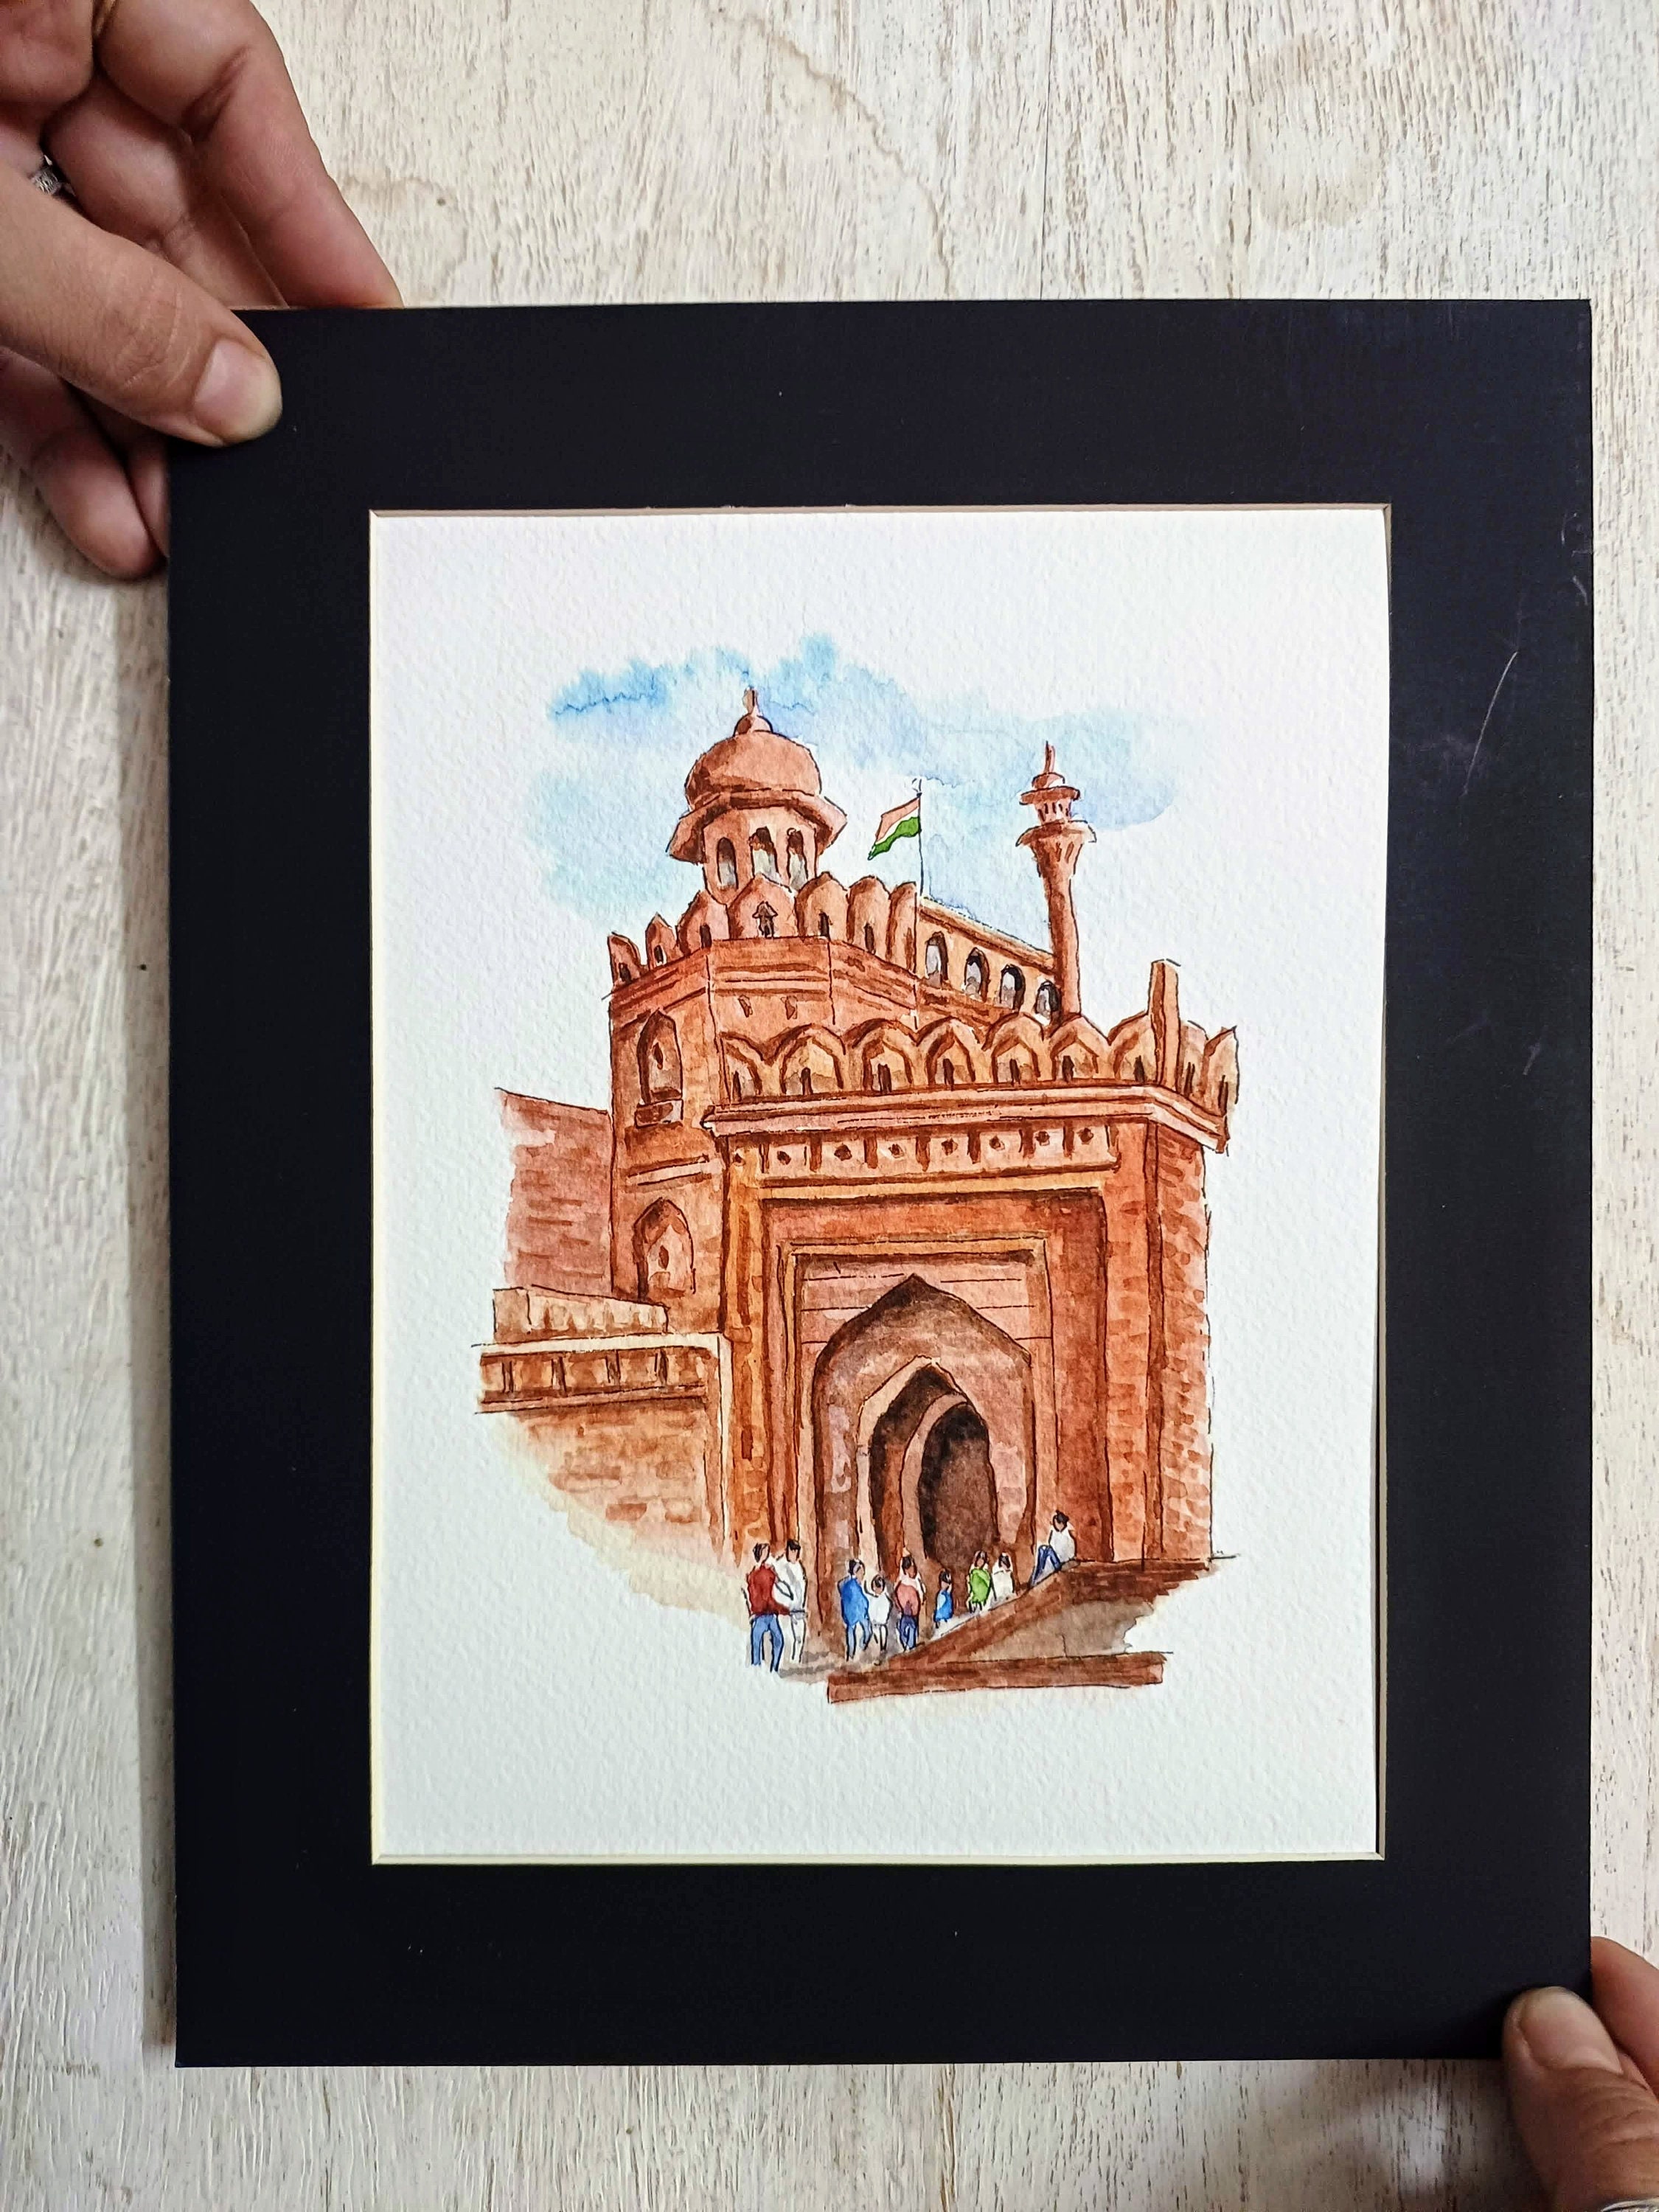 How To Make Sketch Of Lal Kila।Lal kile ka sketch।Drawing Of Red Fort।26  January/15 August Drawing - YouTube